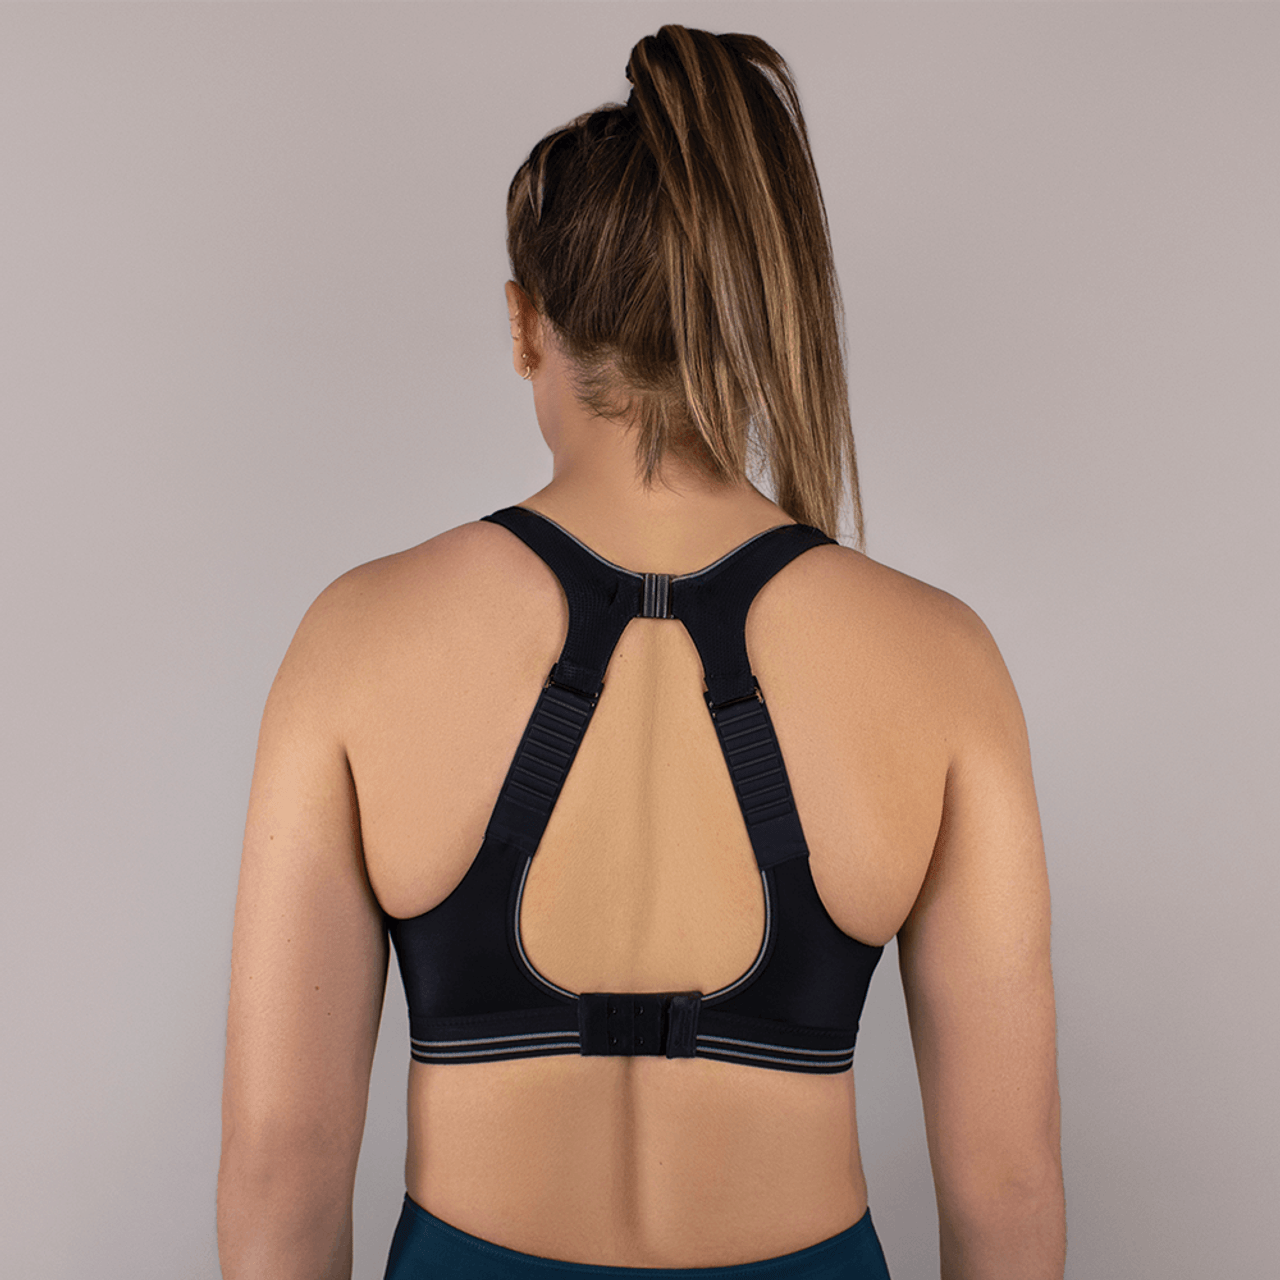 SHOCK ABSORBER ULTIMATE RUN SPORTS BRA HIGH SUPPORT IMPACT S5044